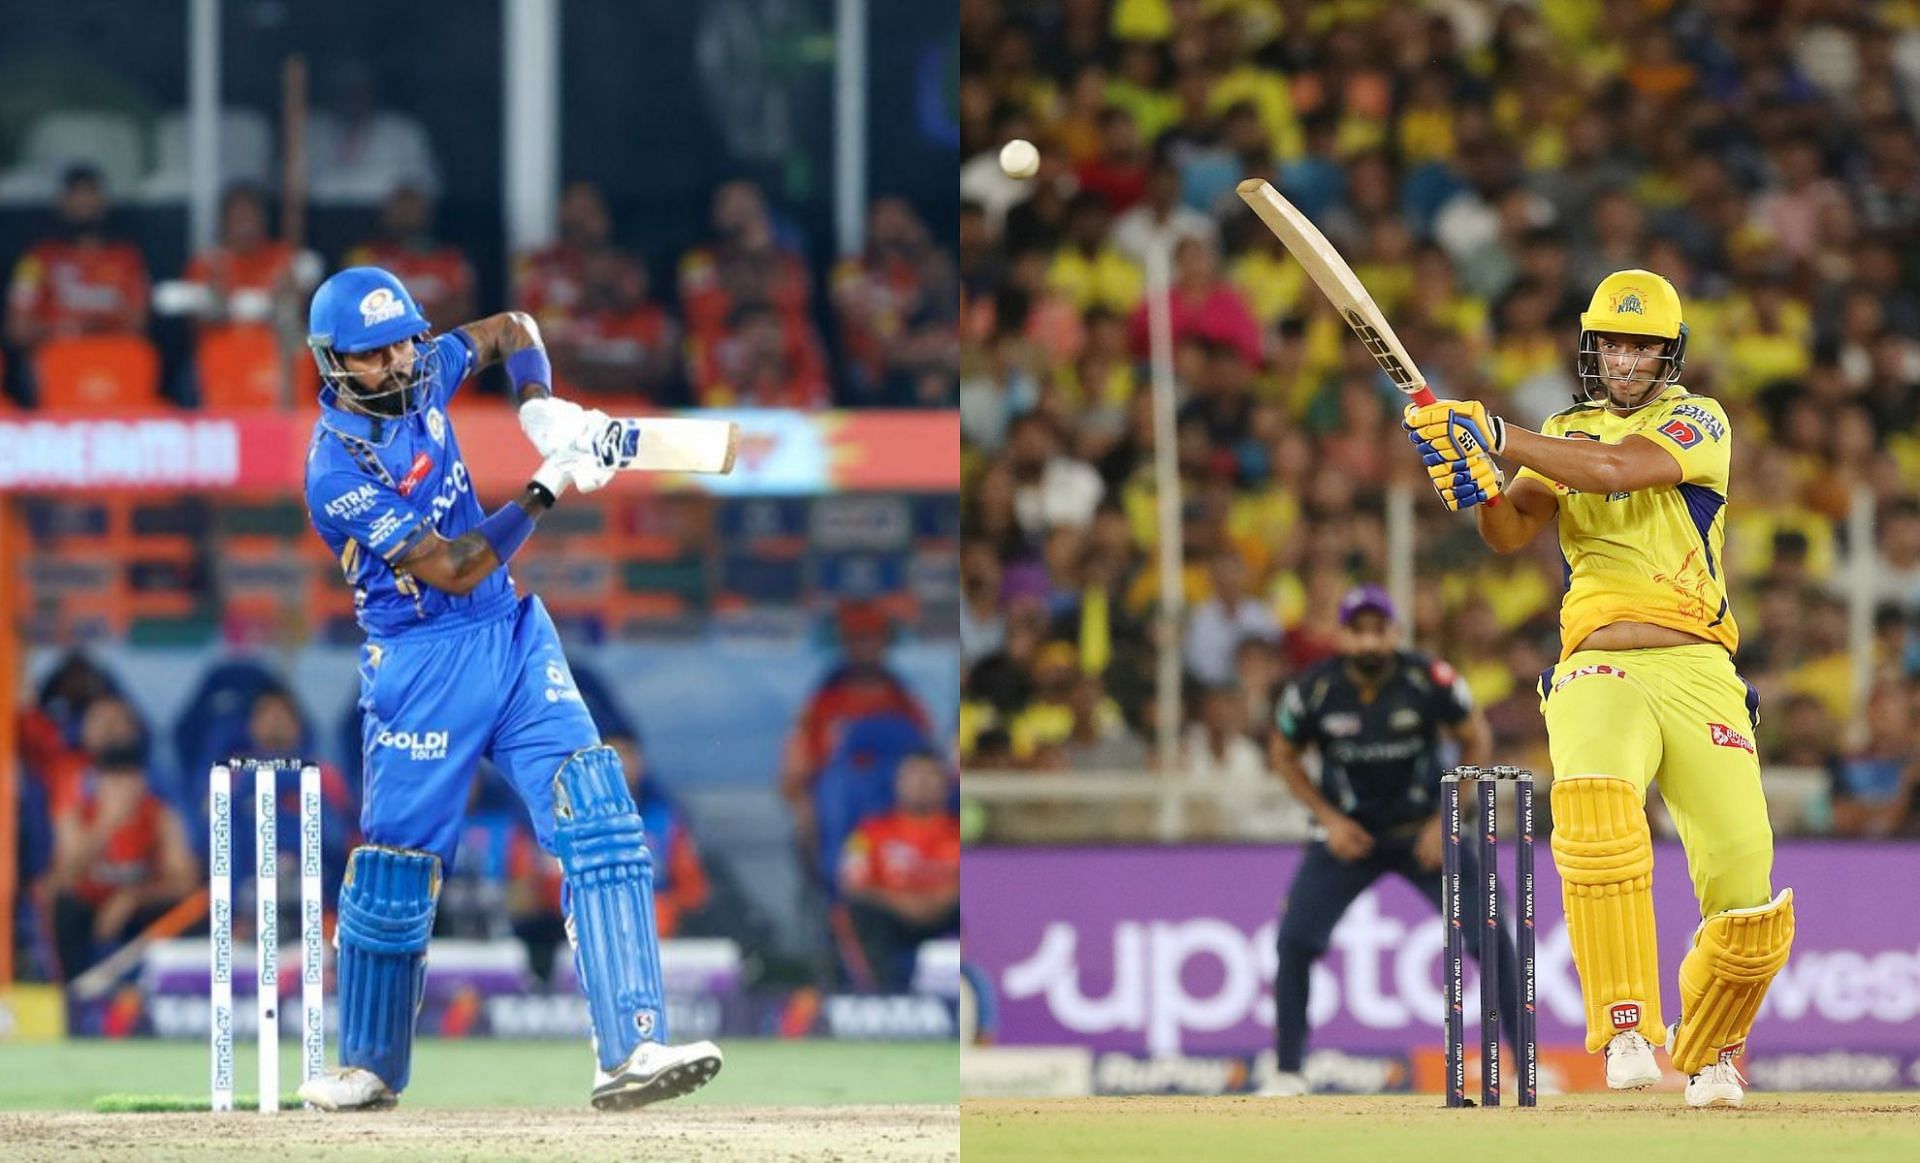 Both Hardik Pandya and Shivam Dube are likely to be part of the 15-member squad